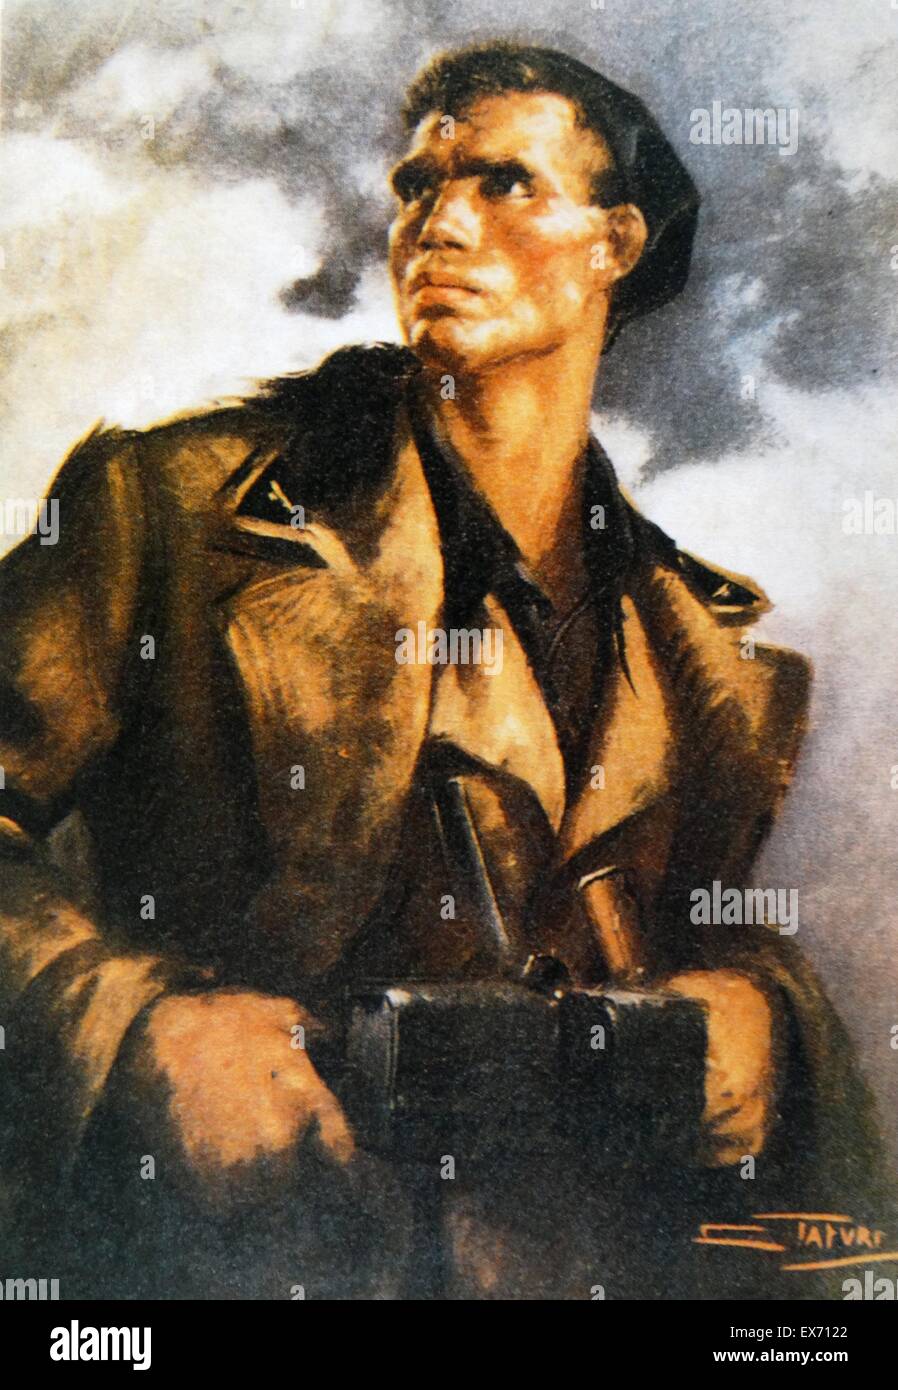 Painting of a soldier from the Corps of Volunteer Troops (Italian: Corpo Truppe Volontarie, CTV) was an Fascist Italian expeditionary force which was sent to Spain to support the Nationalist forces under General Francisco Franco against the Spanish Republ Stock Photo